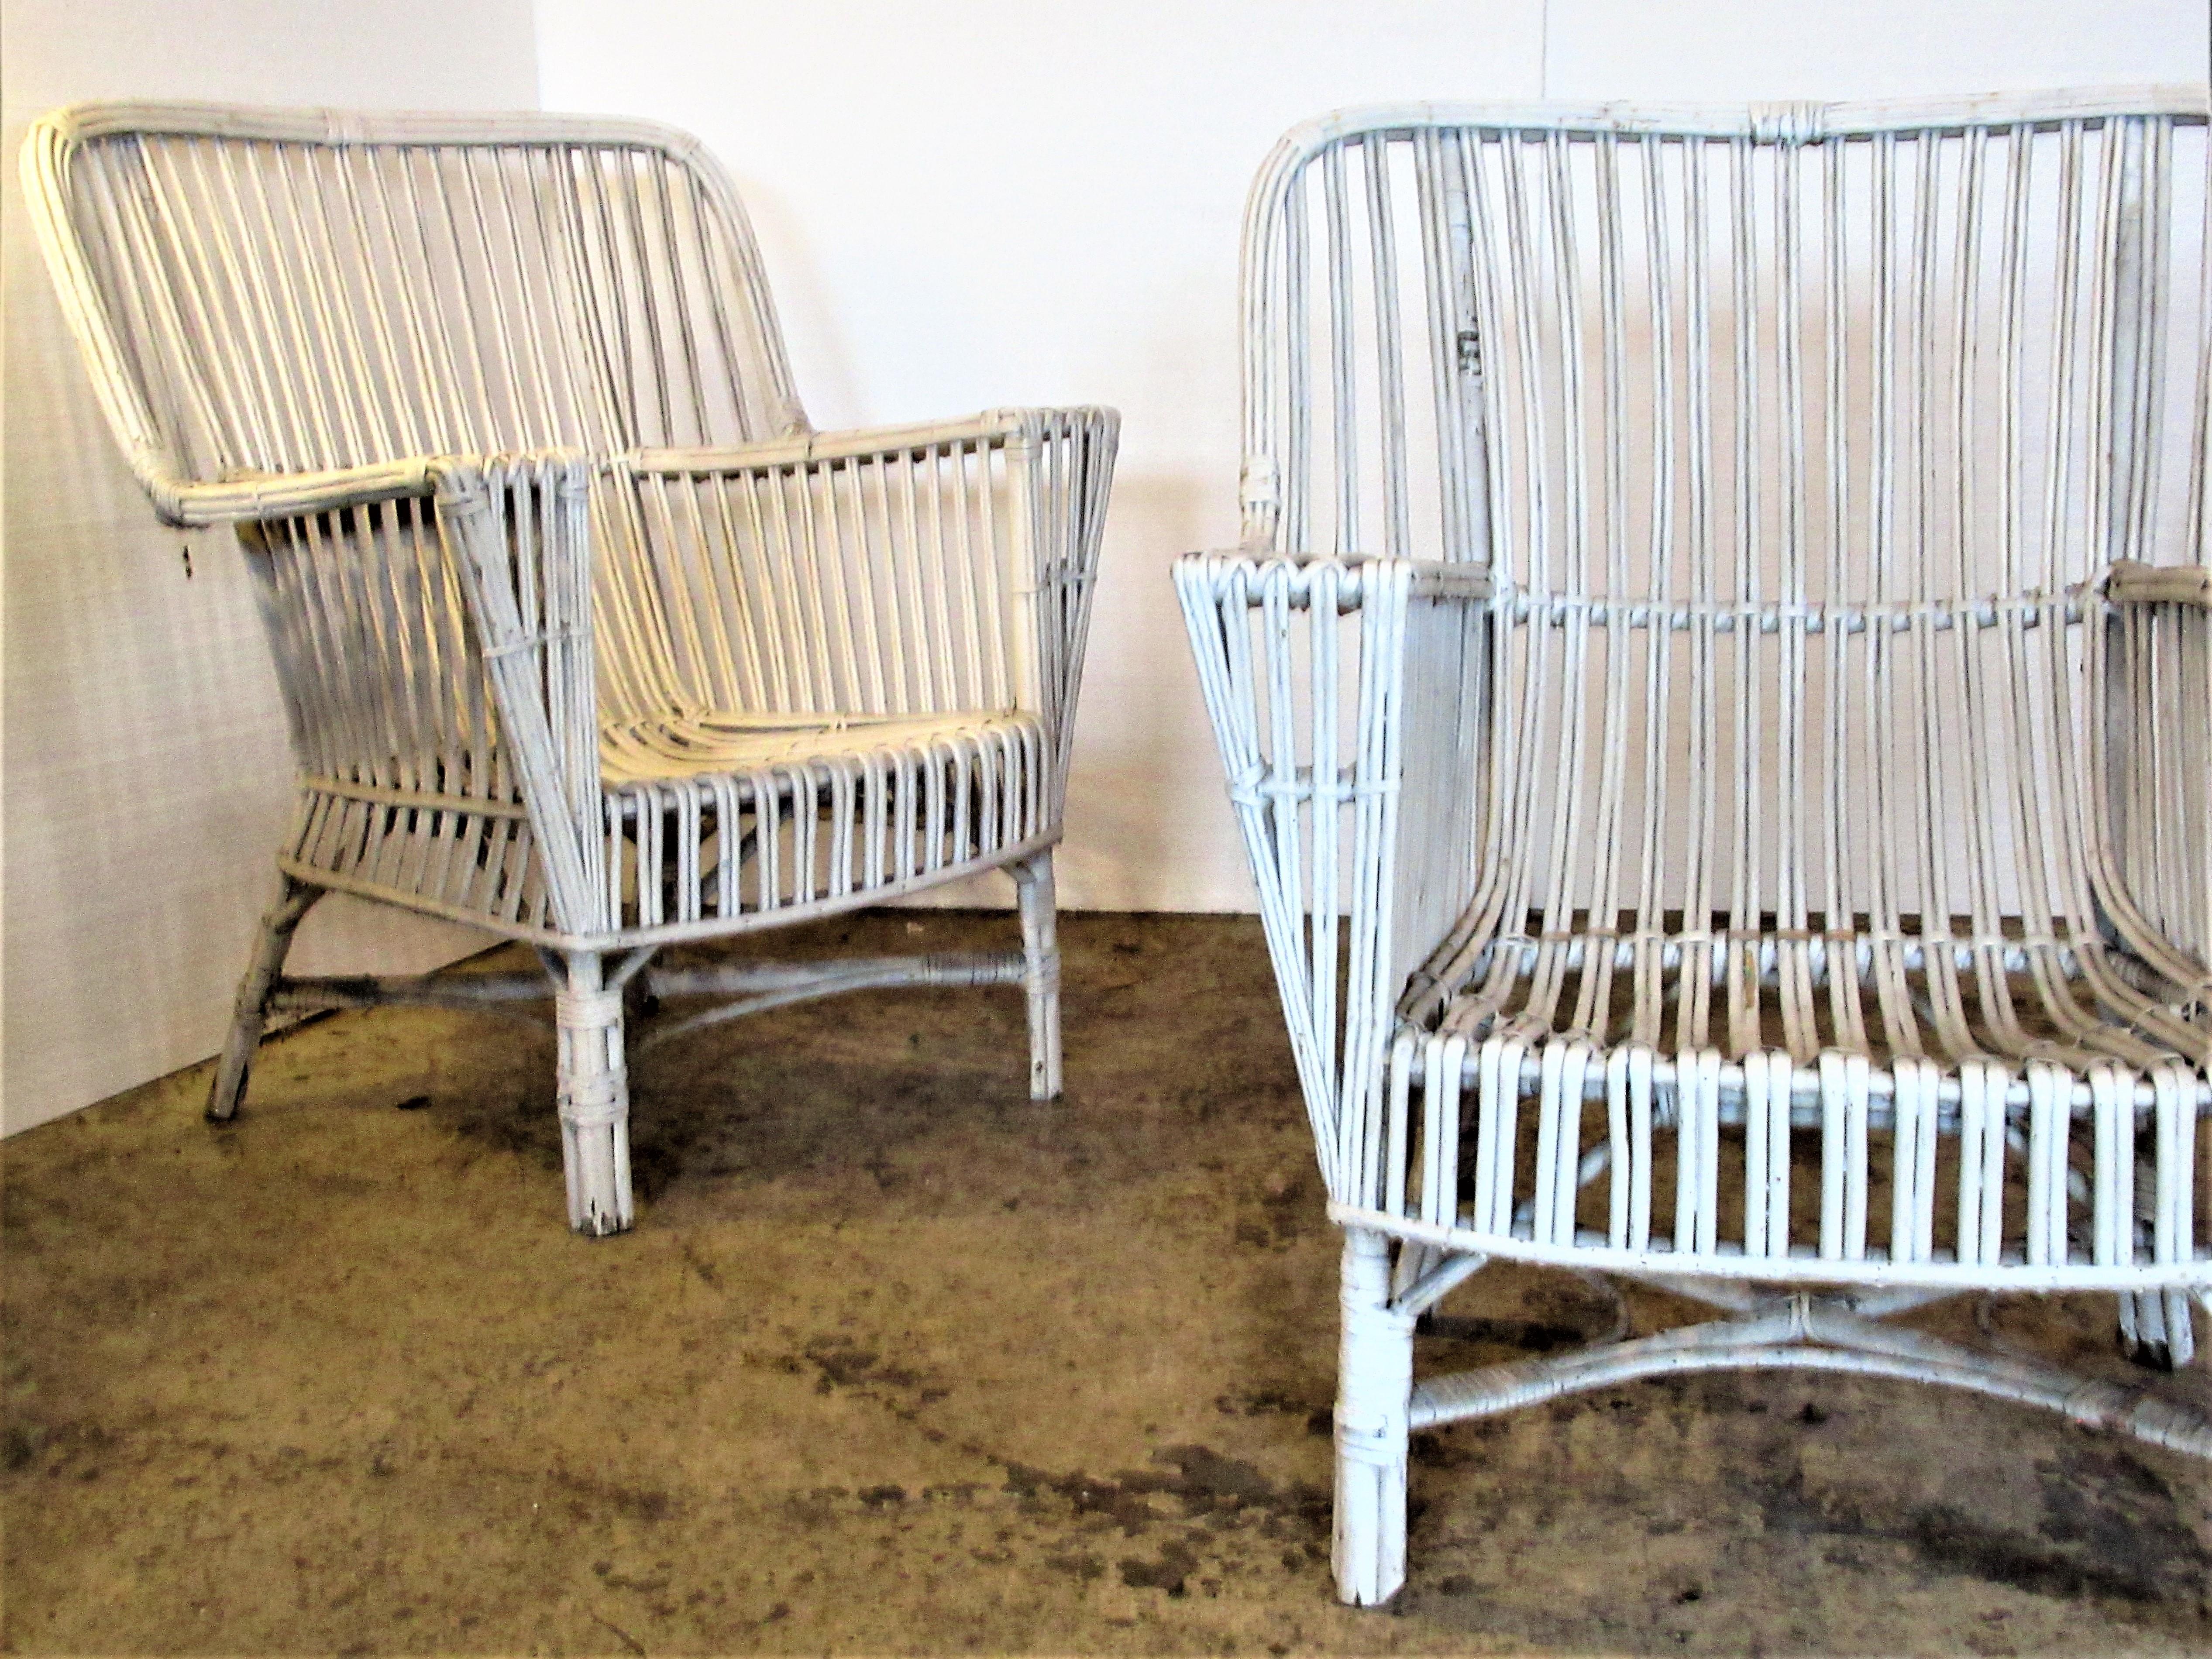 Three Classic American 1930s stick wicker armchairs in old worn white painted surface. Look at all pictures and read condition report in comment section.